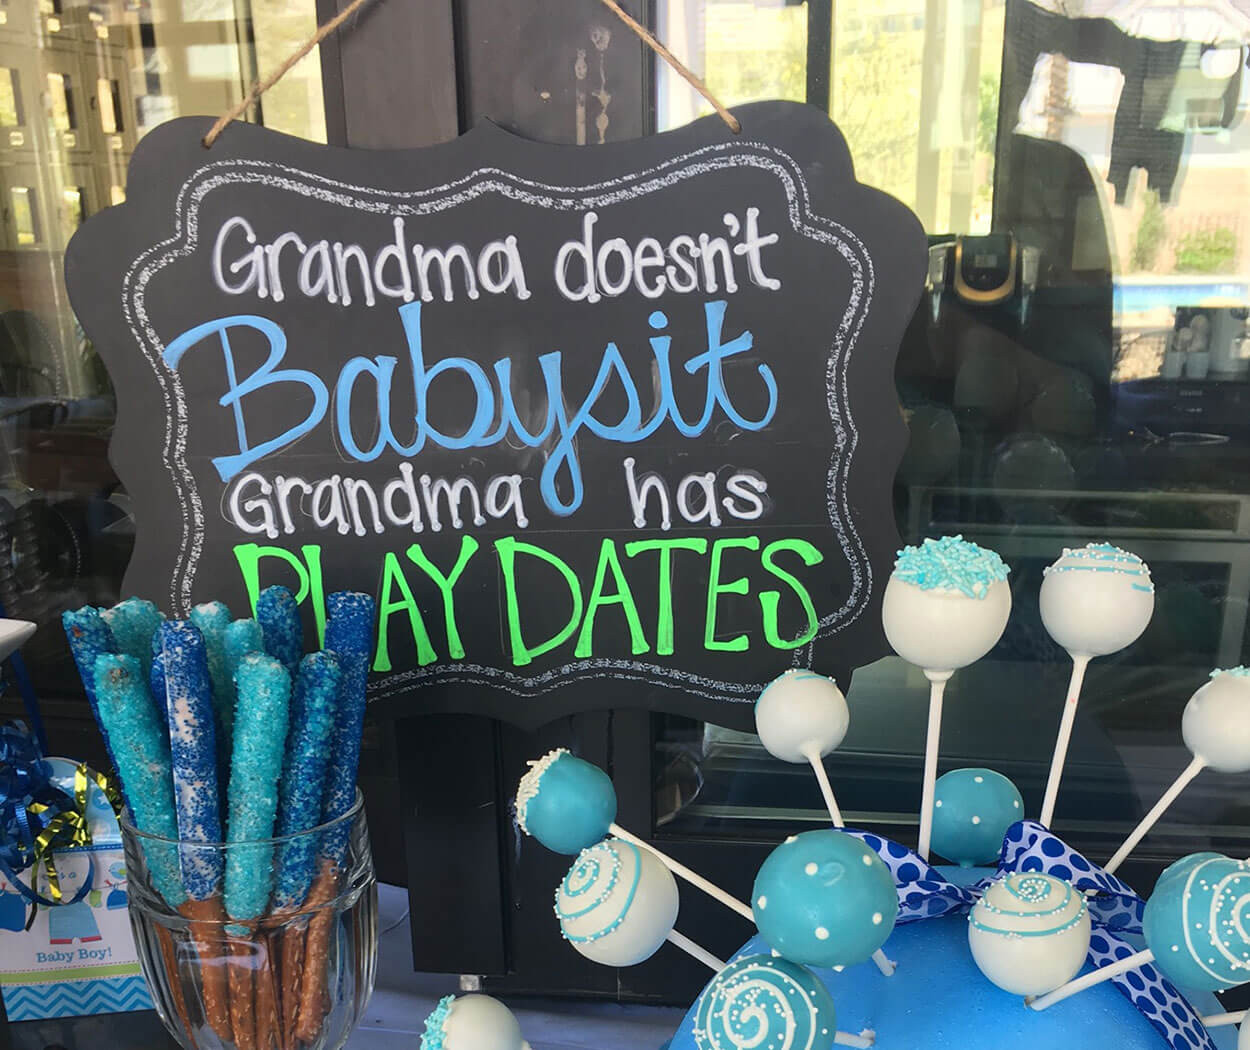 Gift Ideas For Grandma From Baby
 Grandma is Getting a Baby Shower